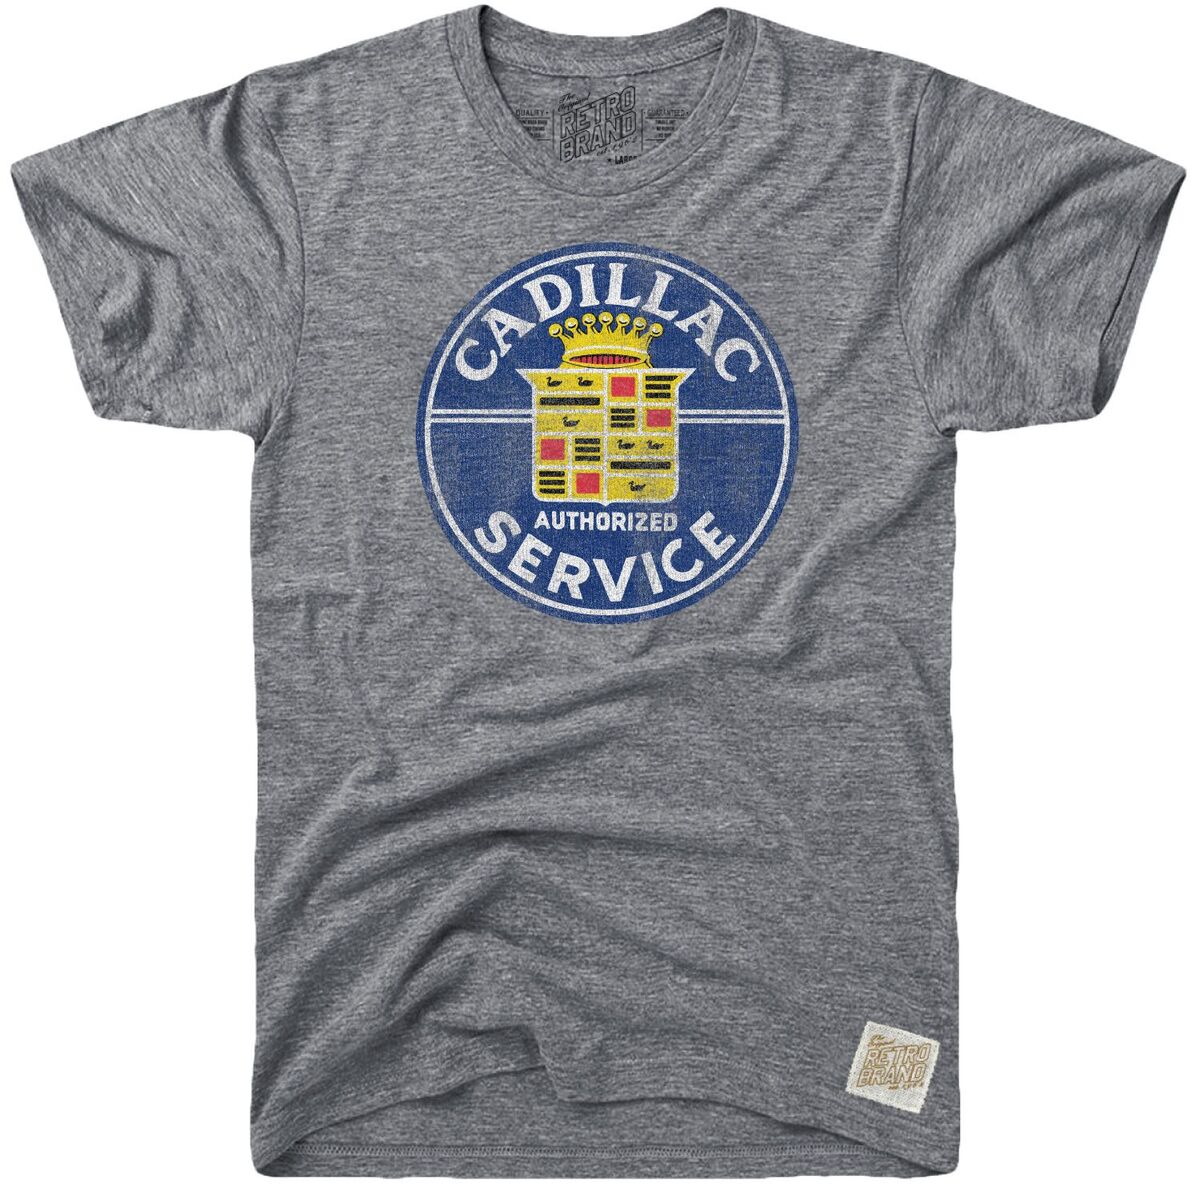 Authorized Cadillac Service logo in blue and white on our tri-blend unisex tee in streaky gray